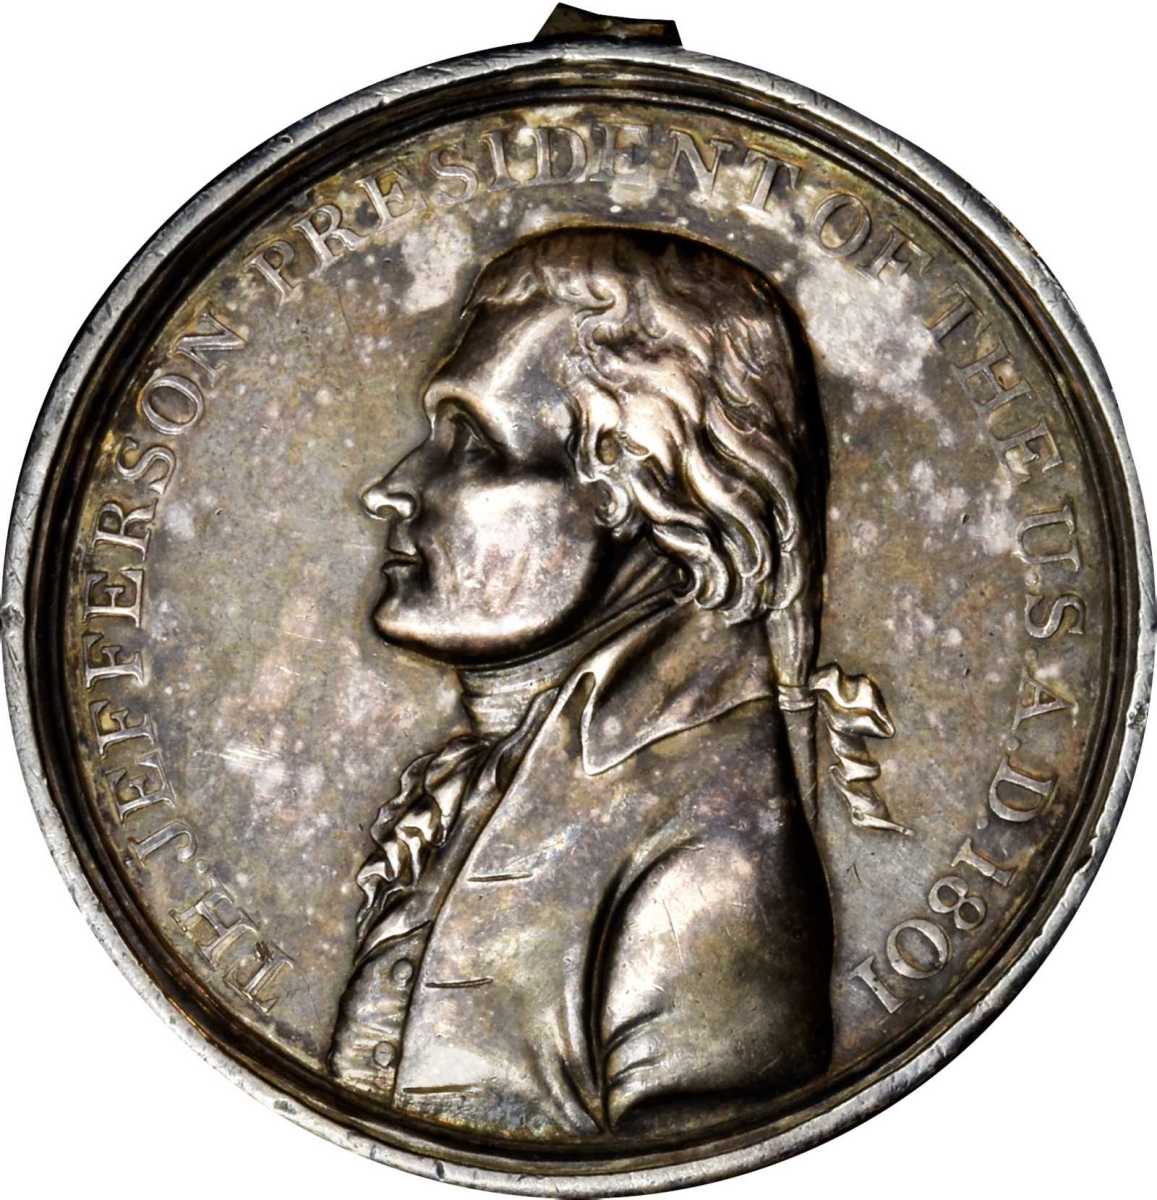 An 1801 Thomas Jefferson small-size Indian Peace medal (Julian IP-4, Prucha-39), weighing 728.1 grains and measuring 54.4 mm. (Image courtesy of Stack’s Bowers)